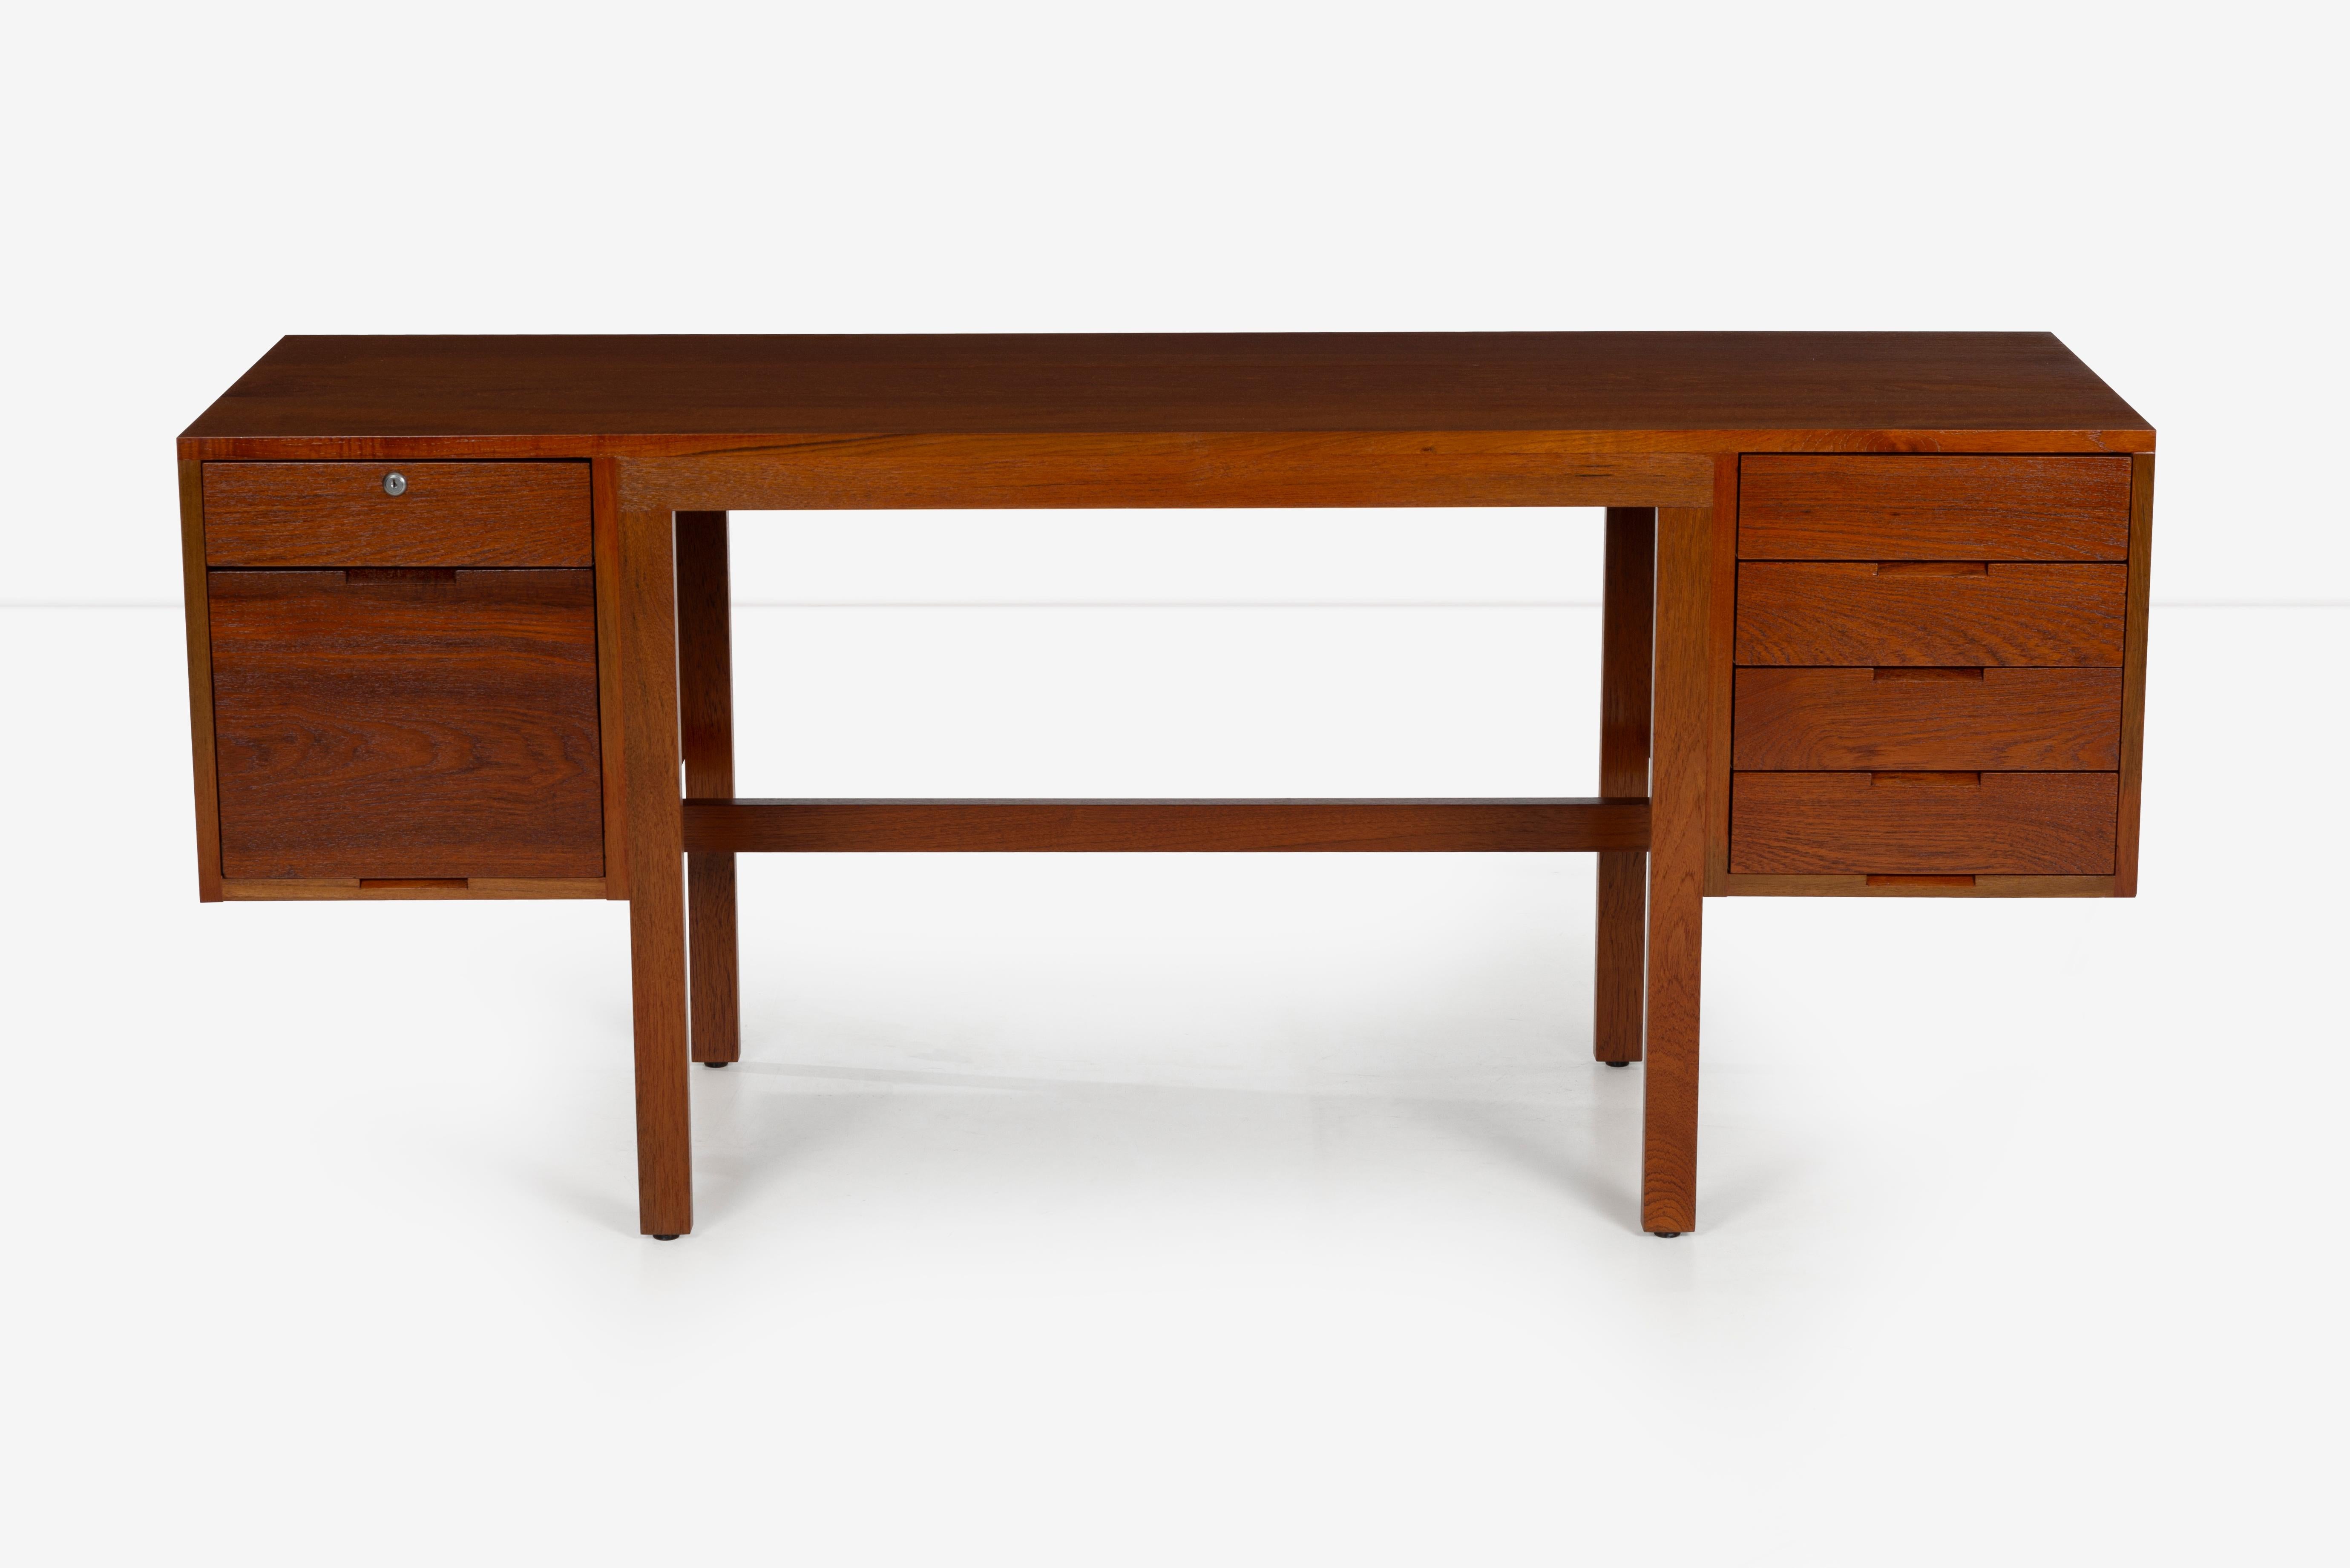 Marcel Breuer custom desk, acquired by Rufus Stillman, who built three separate Breuer Houses after seeing Breuer’s 